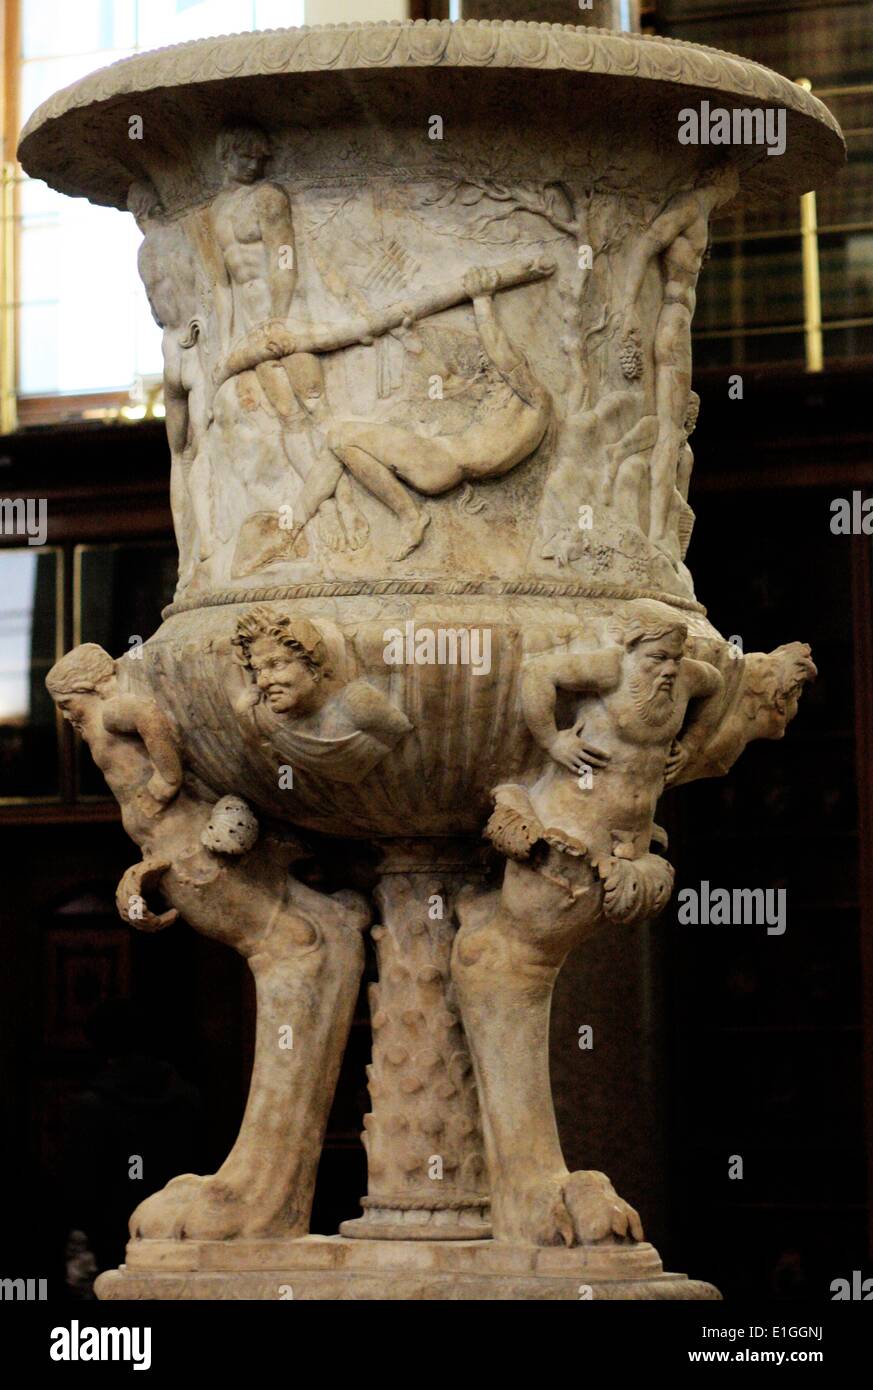 Piranesi Vase, Roman, 2nd century AD - fragments of a decorative vase and several other monuments incorporated into an Italian 18th-century composition. Stock Photo